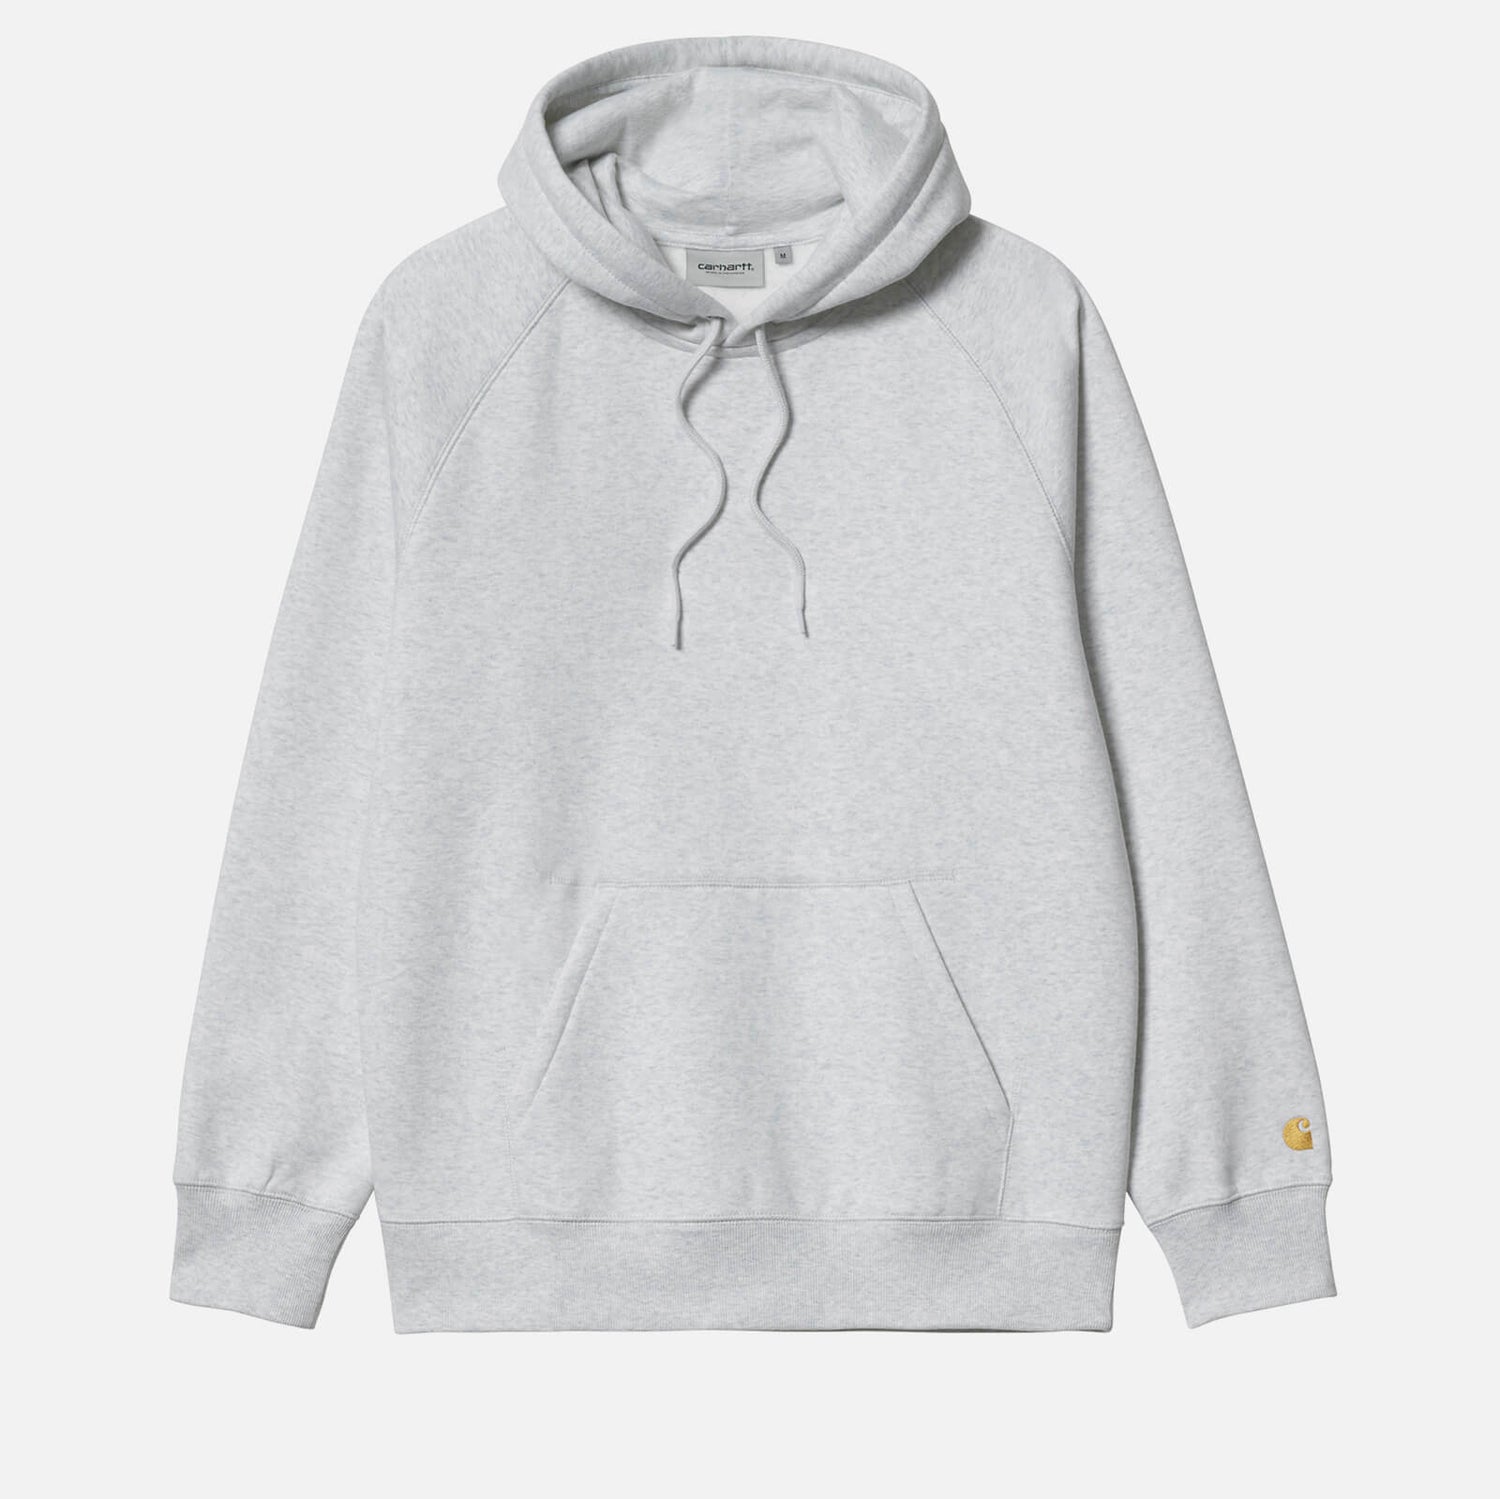 Carhartt WIP Men's Chase Hoodie - Ash Heather/Gold - S